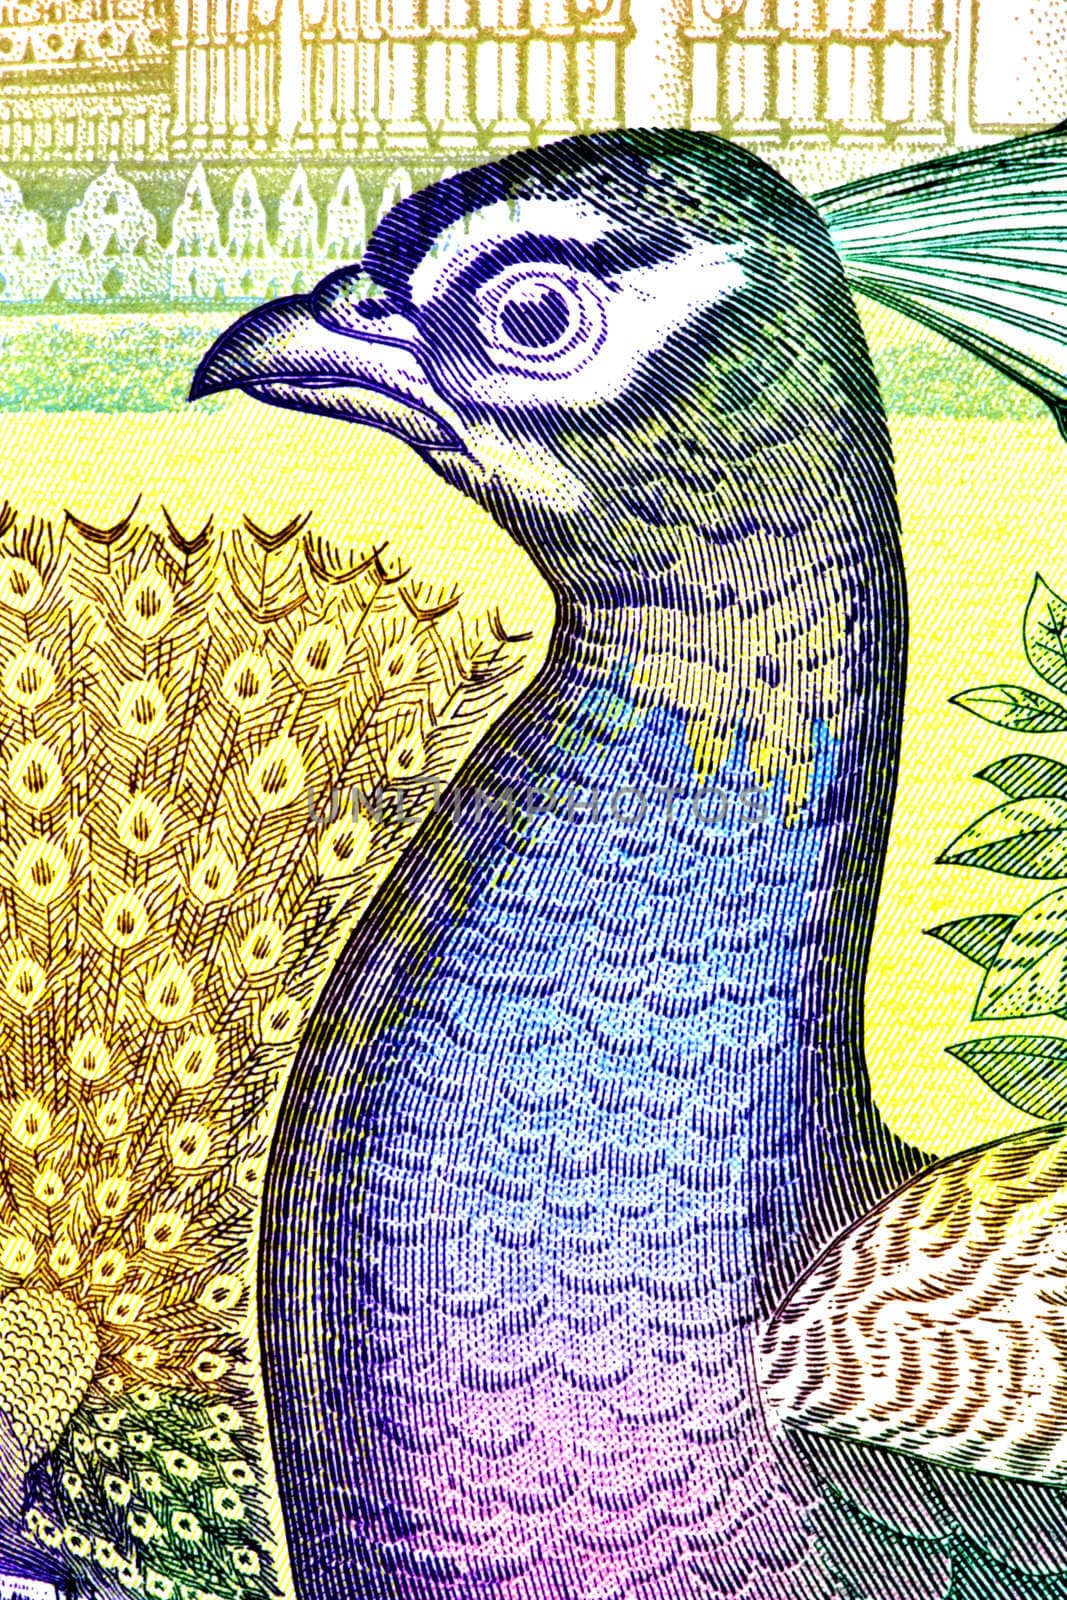 Macro image of a peacock on a currency note.